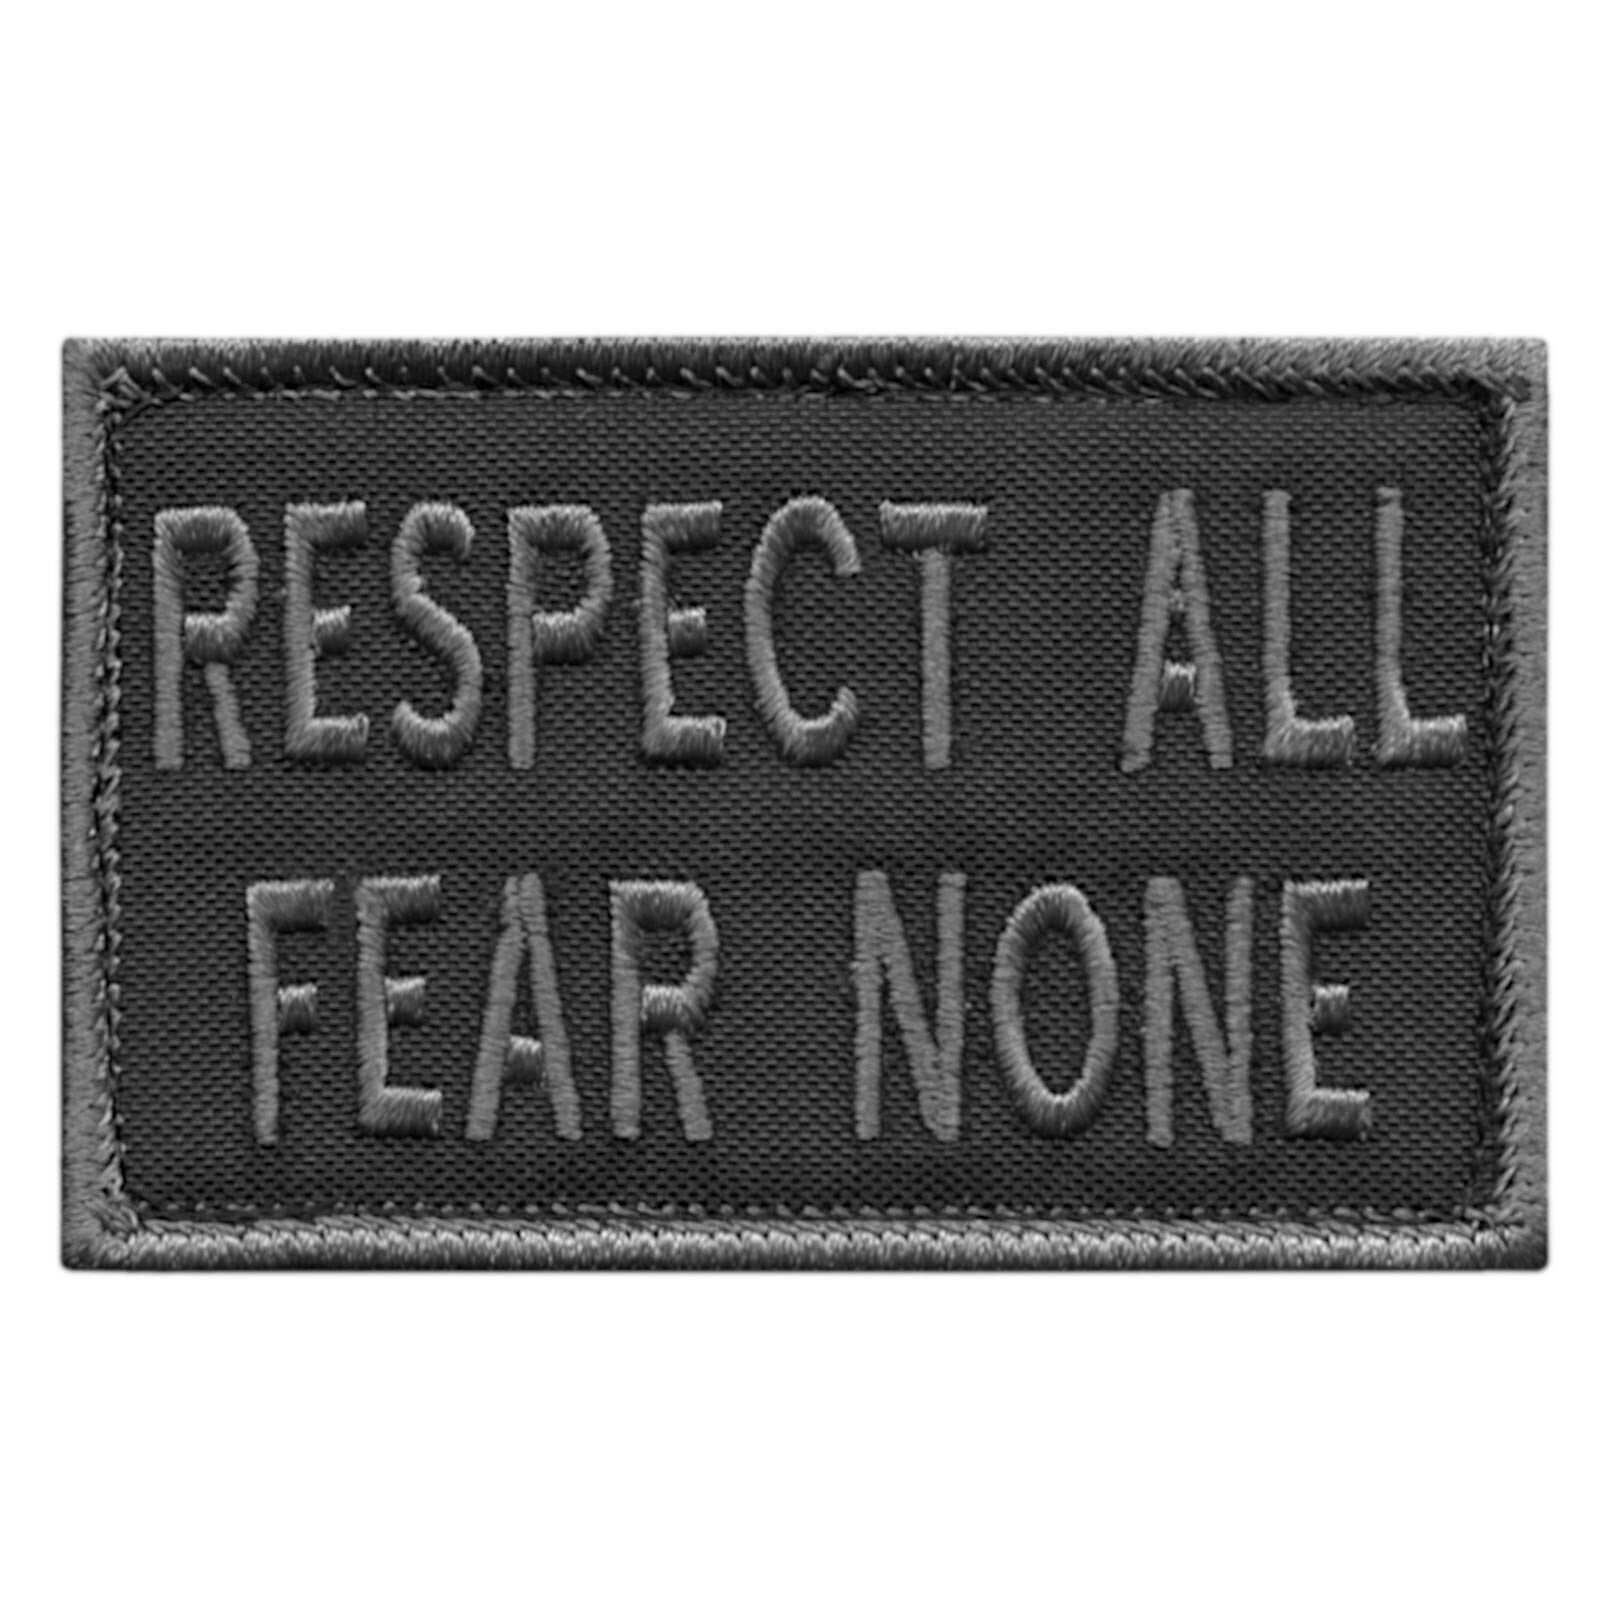 LEGEEON Respect All Fear None Blackout Subdued 2x3.25 Morale Tactical Fastener